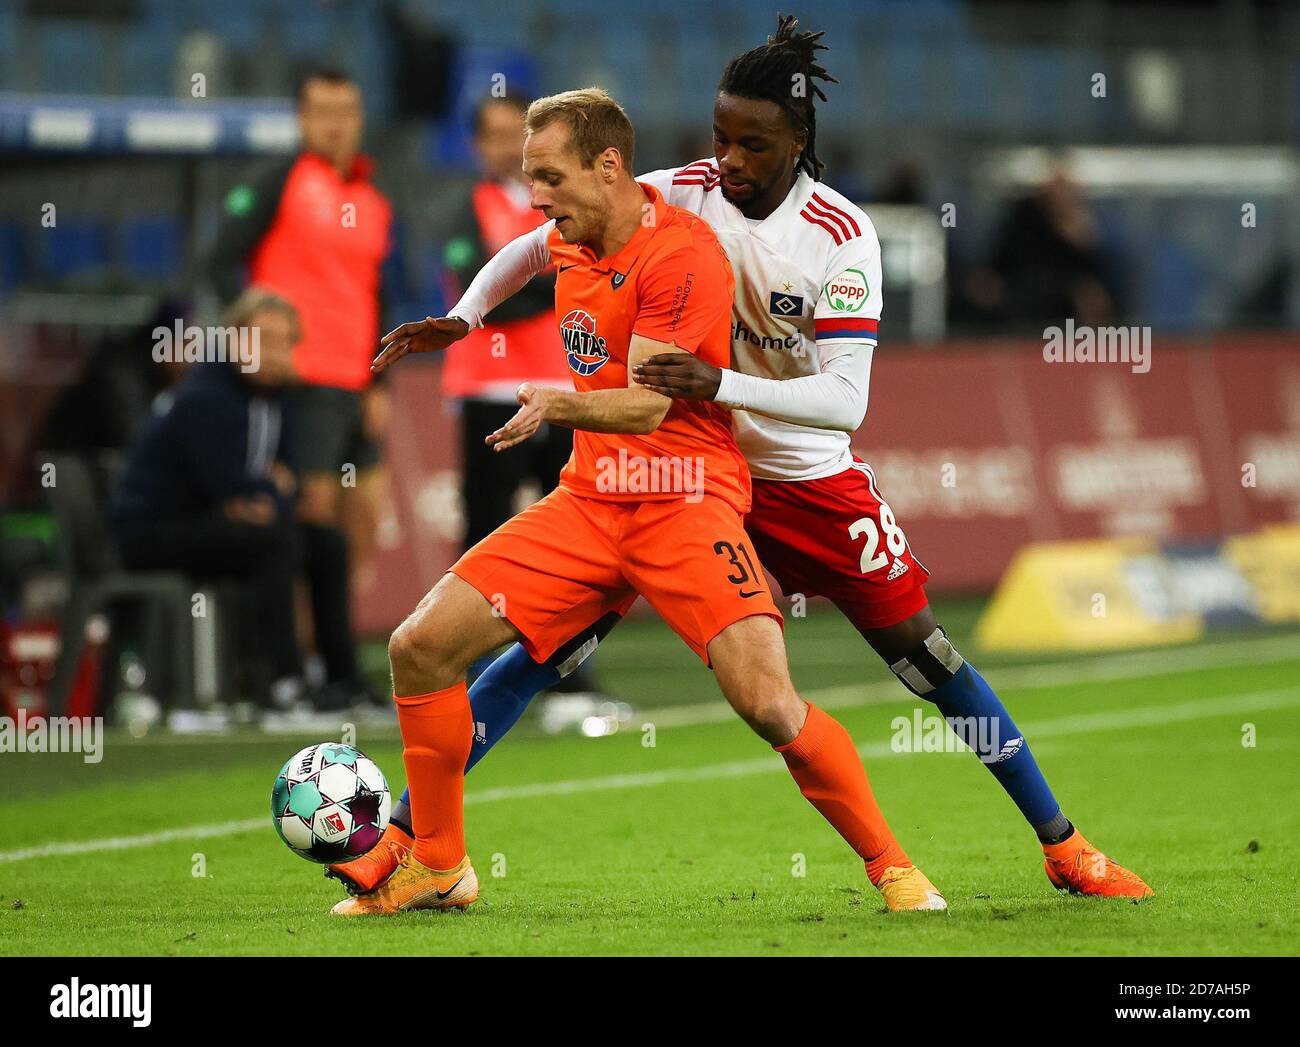 Hamburg, Germany. 21st Oct, 2020. Football: 2nd Bundesliga, 3rd matchday, Hamburger SV - Erzgebirge Aue in the Volksparkstadion. Hamburg's Gideon Jung (r) and Aues Ben Zolinski in a duel for the ball. Credit: Christian Charisius/dpa - IMPORTANT NOTE: In accordance with the regulations of the DFL Deutsche Fußball Liga and the DFB Deutscher Fußball-Bund, it is prohibited to exploit or have exploited in the stadium and/or from the game taken photographs in the form of sequence images and/or video-like photo series./dpa/Alamy Live News Stock Photo